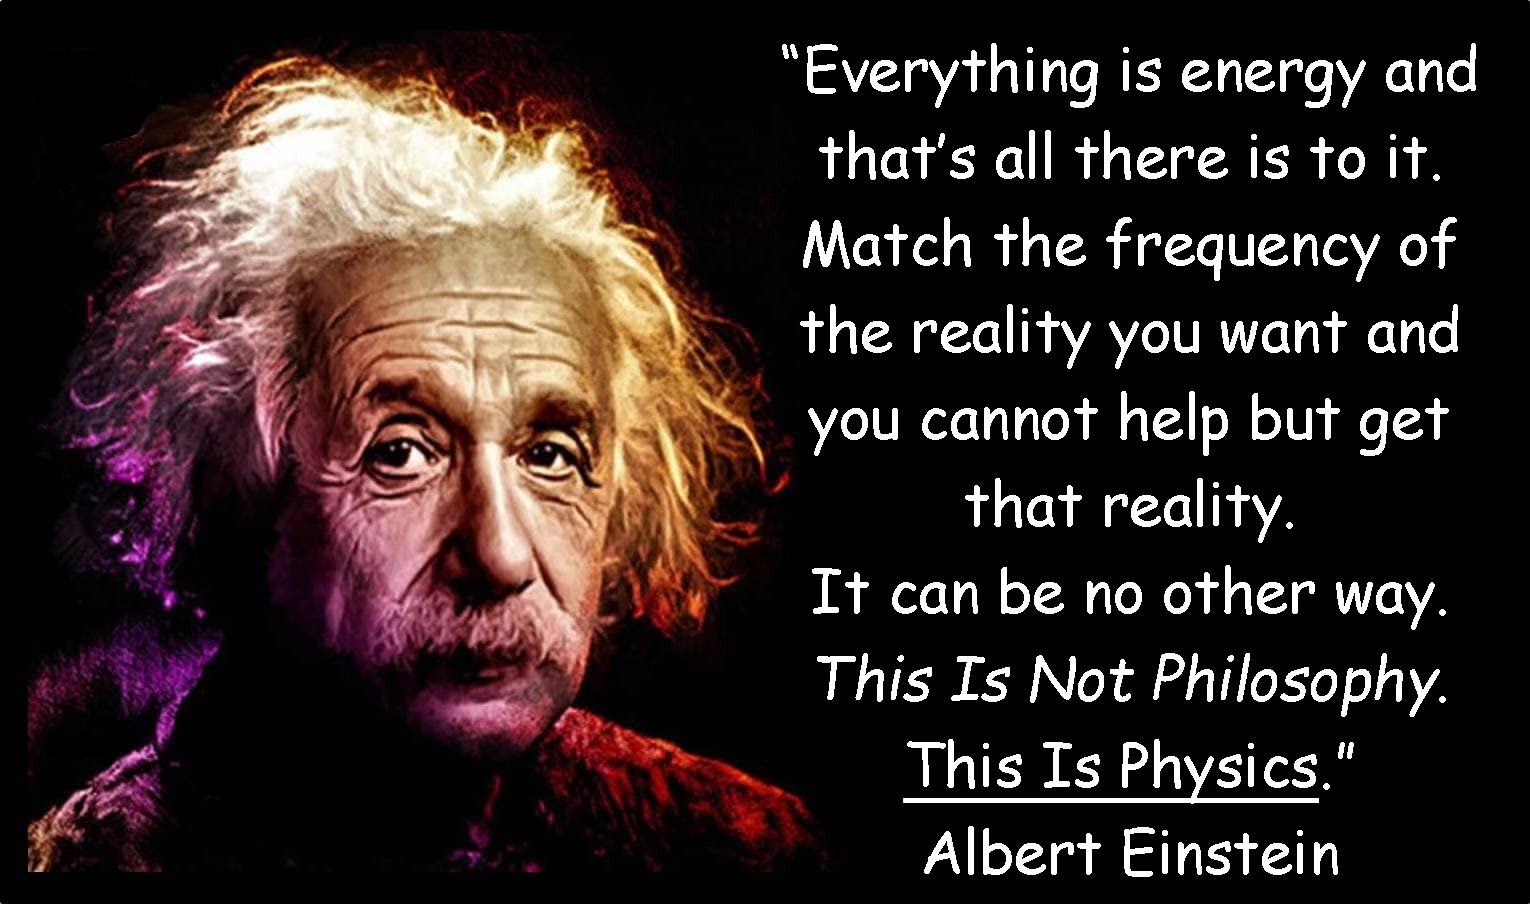 Albert Einstien; Everything is energy and that’s all there is to it. Match the frequency of the reality you want and you cannot help but get that reality. It can be no other way; electroceutical; Healy